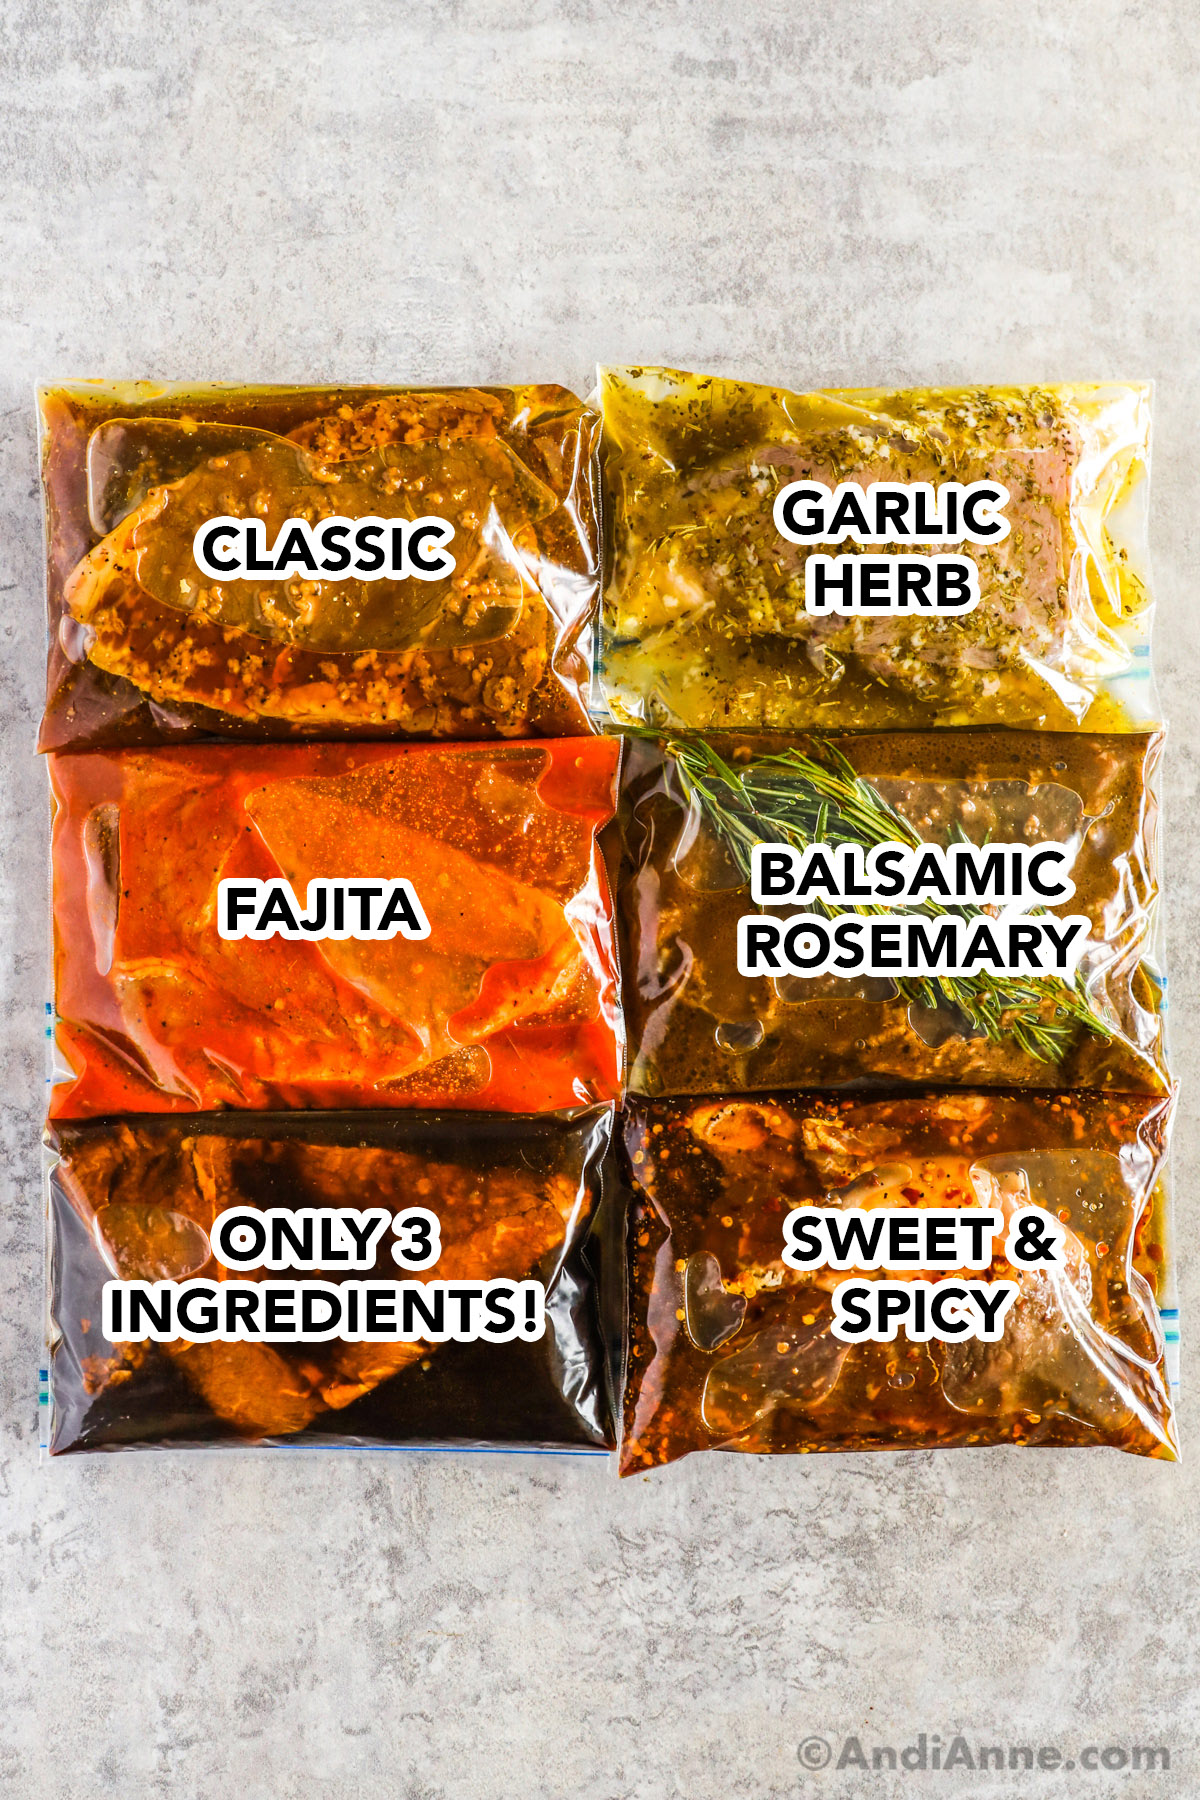 Six steaks in bags with marinades including classic, garlic herb, fajita, balsamic rosemary, only 3 ingredients, sweet and spicy.